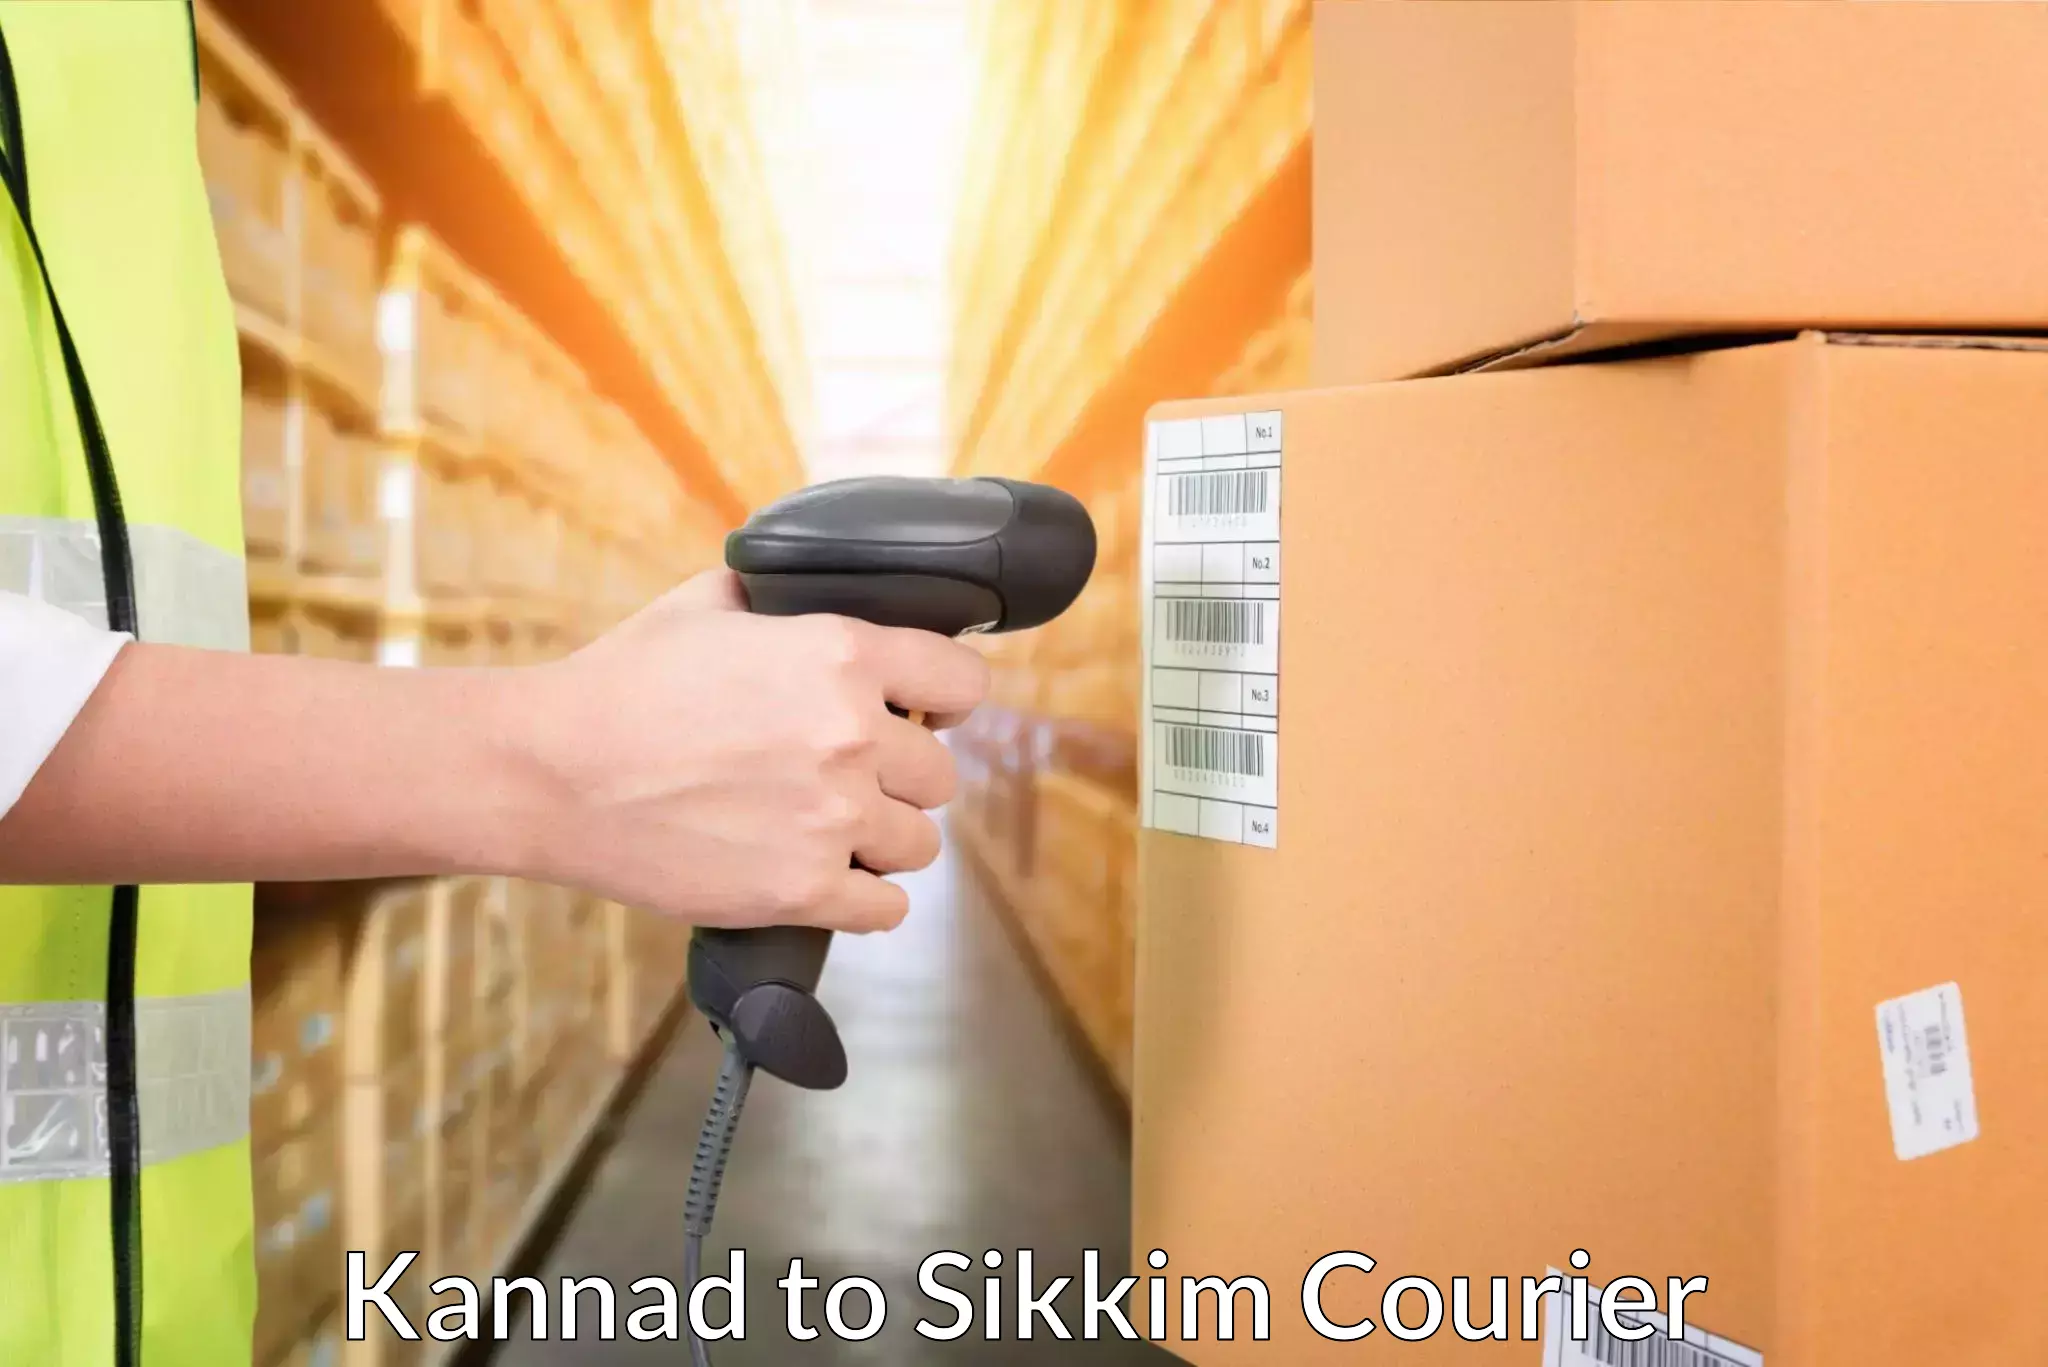 Nationwide shipping coverage Kannad to Pelling